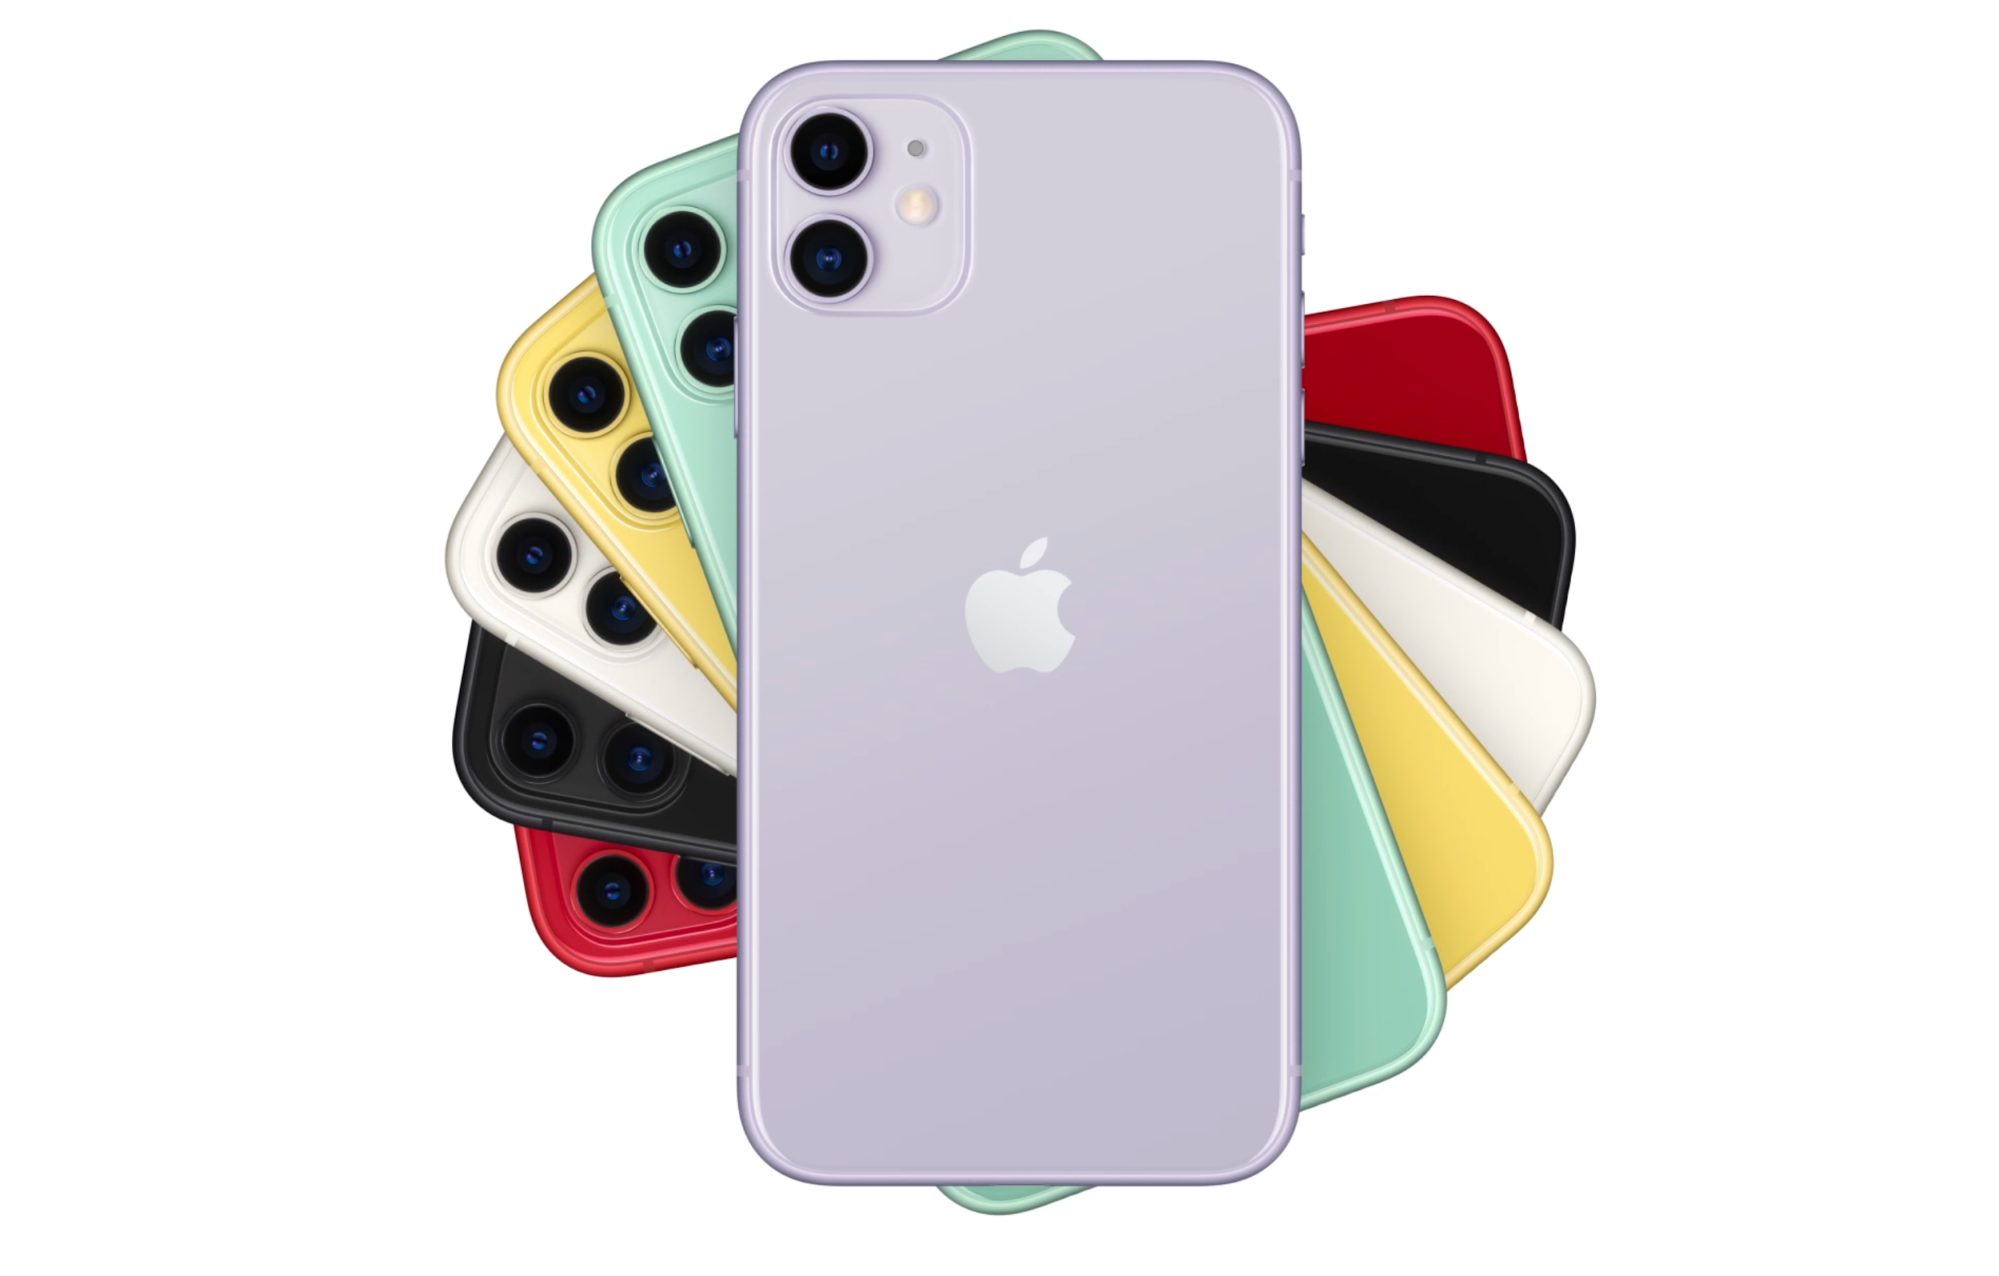 Apple Announces Iphone 11 Iphone 11 Pro And Iphone 11 Pro - new model 2019 iphone i phone 11 pro max